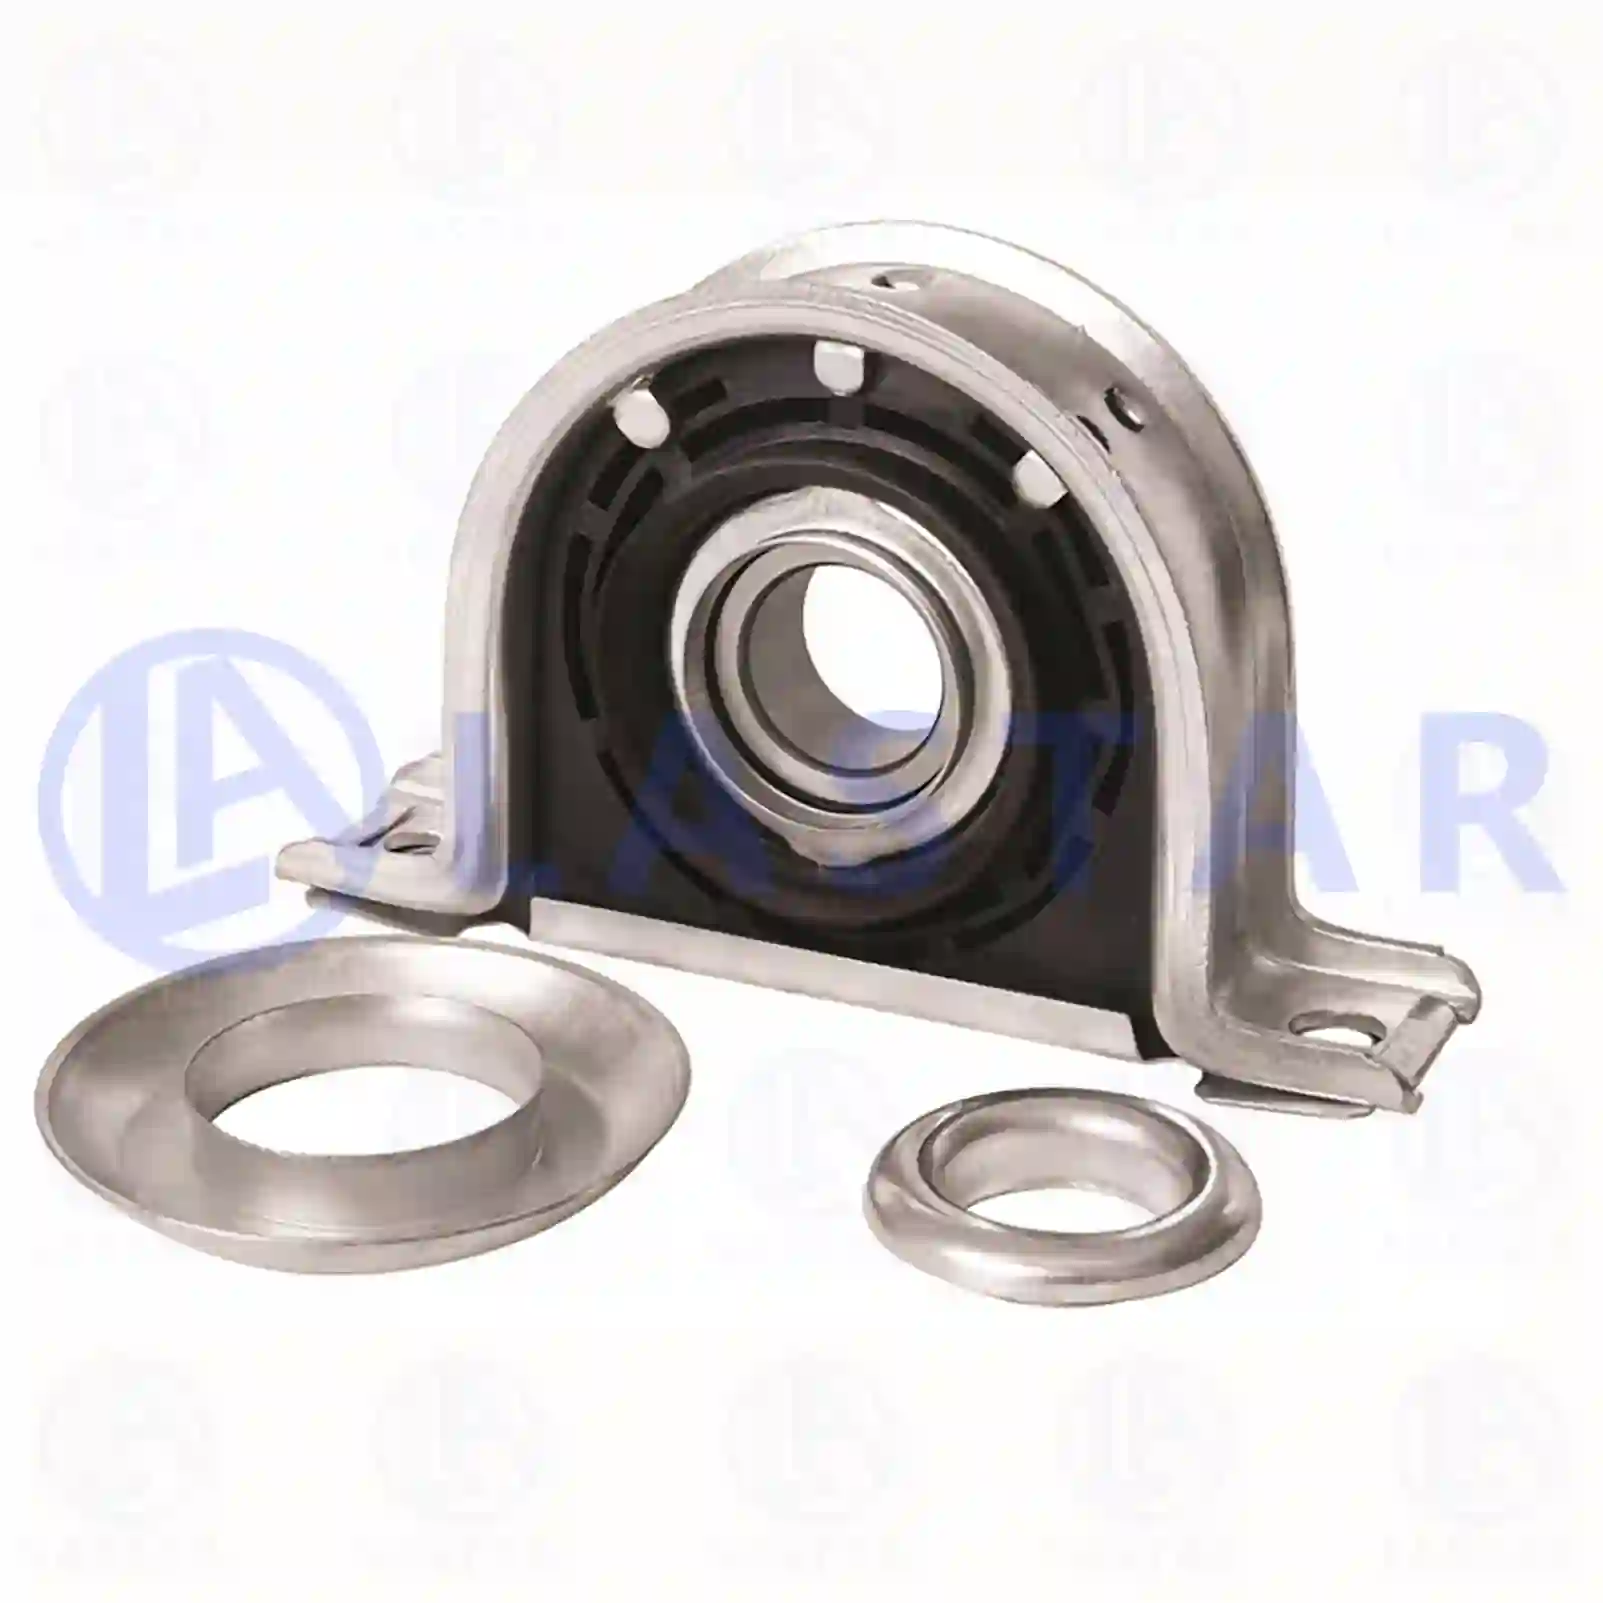 Support Bearing Center bearing, la no: 77734215 ,  oem no:04682902, 42536523, 4682902, 93160226, 5000242914, 5000816438, 1070171, 1697203, 20362601, 20845657, ZG02502-0008 Lastar Spare Part | Truck Spare Parts, Auotomotive Spare Parts